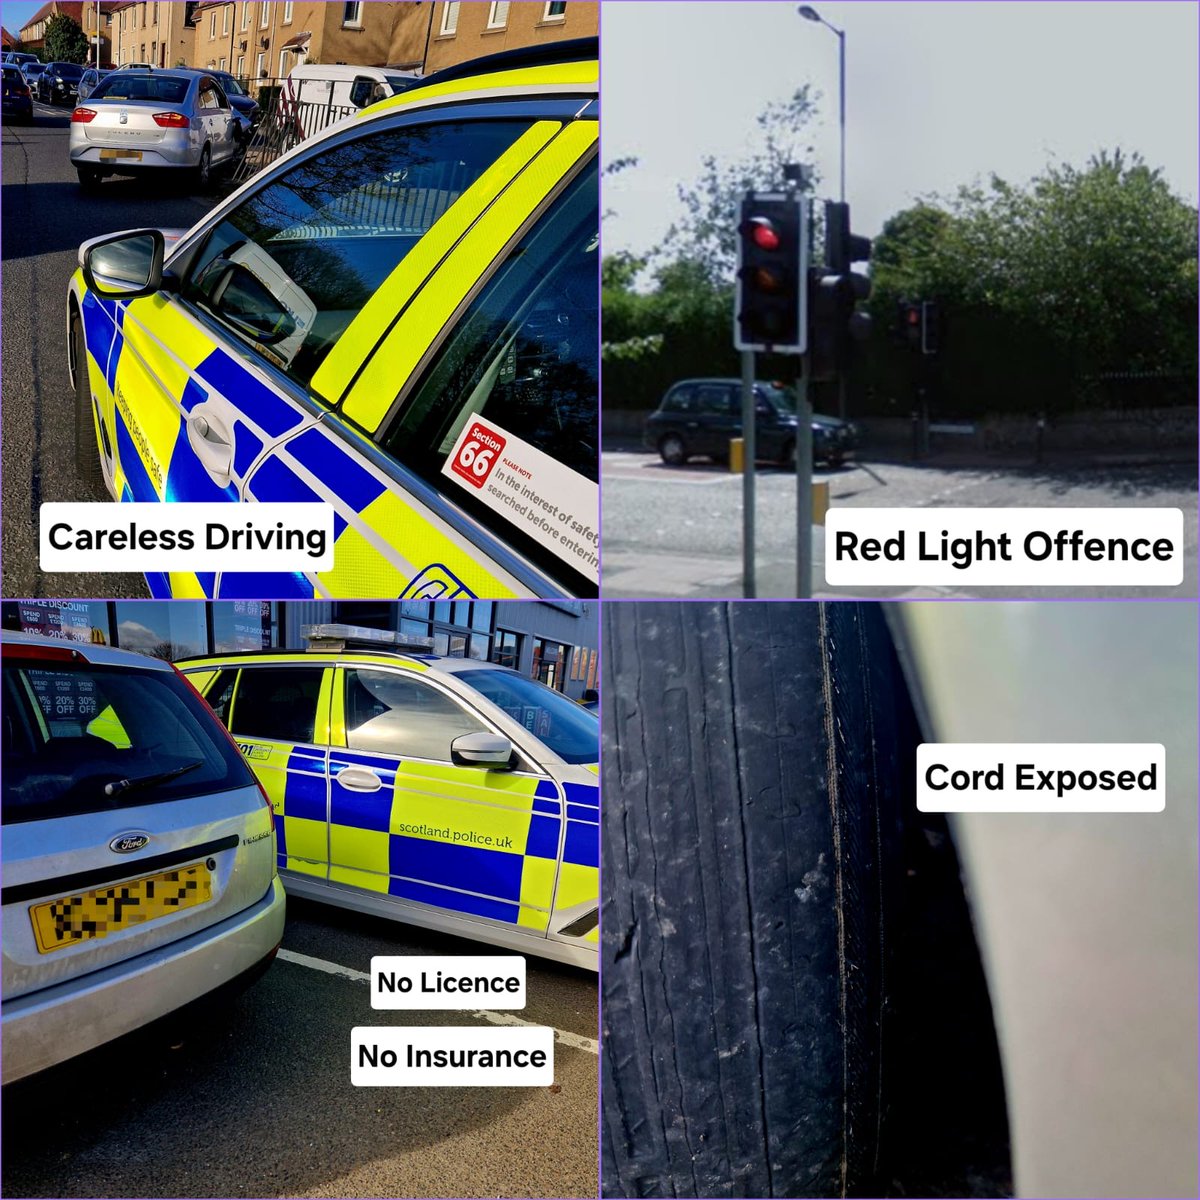 #EdinburghRP have been busy dealing with a whole range of incidents across the city
* Careless Driving
* Red Light offences
* No Licence
* No Insurance
* Cord exposed on tyres
* Seizing Vehicles
to name but a few!
#RoadSafety #S165 #YouCantHide